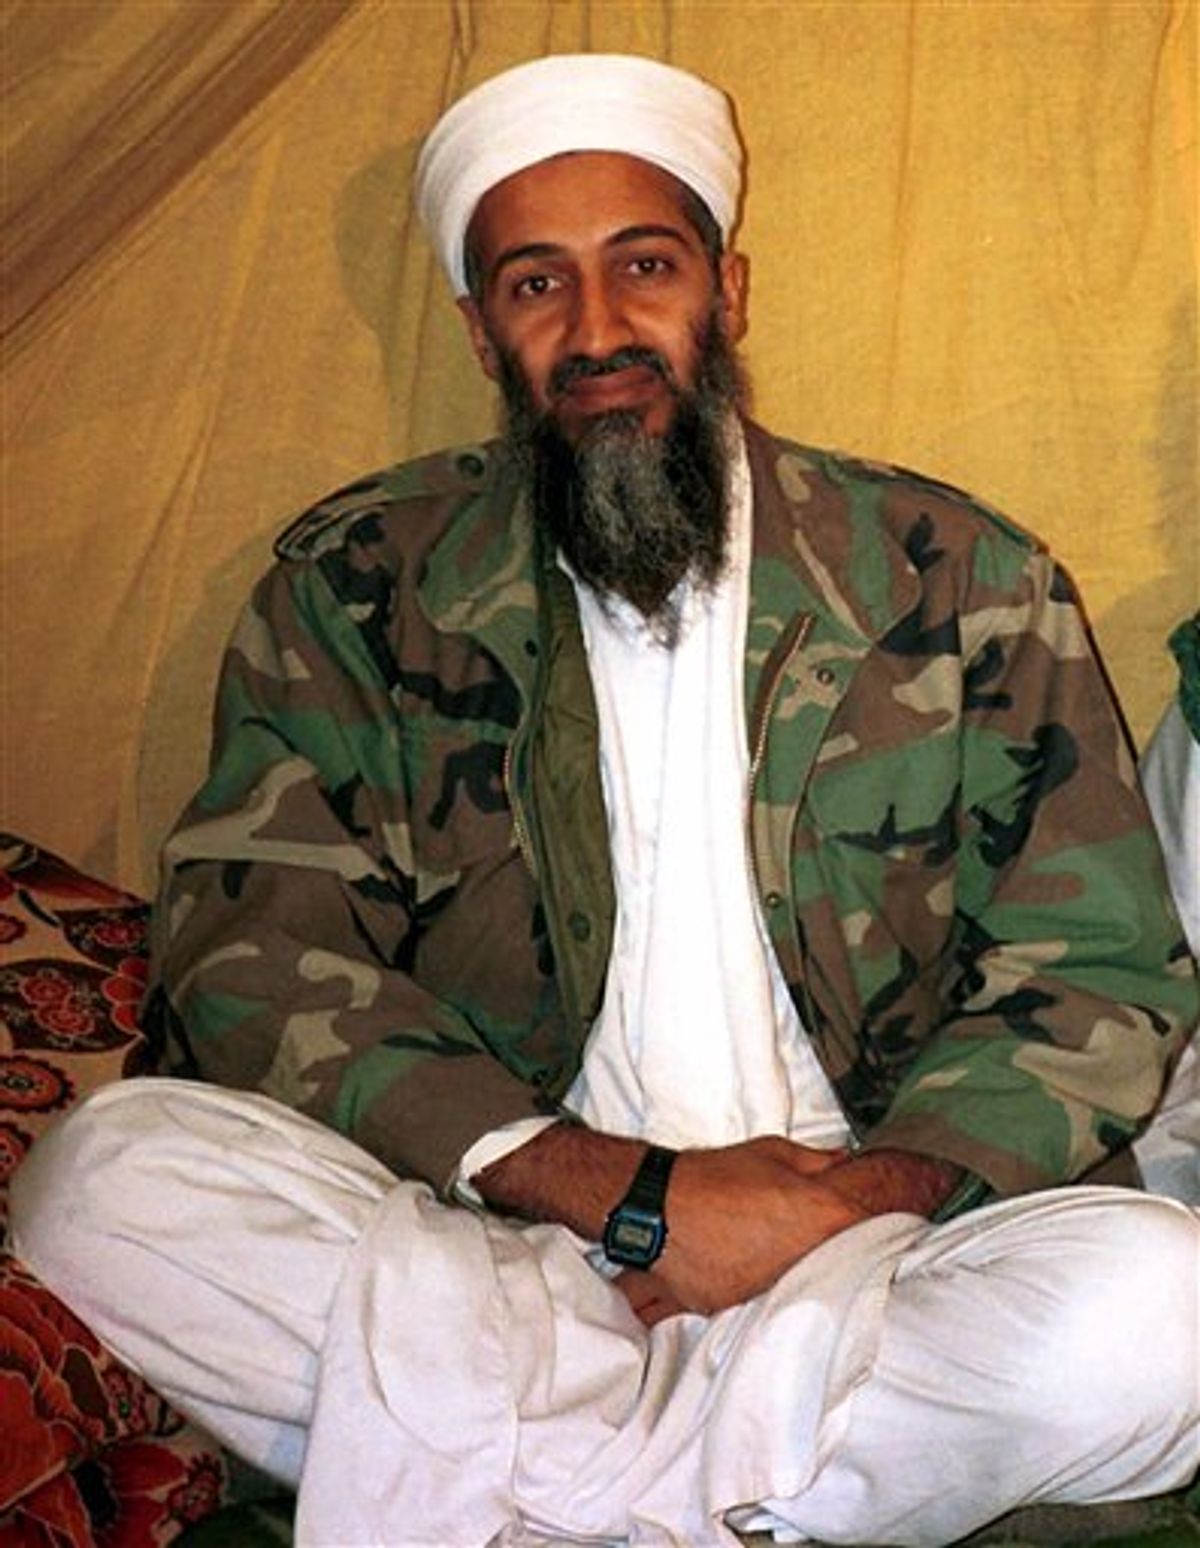 FILE -This undated file photo, shows Osama bin Laden. Americans are expected to get a glimpse of Osama bin Laden's daily life with the disclosure of home videos showing him strolling around his secret compound, along with propaganda tapes that have never been made public (AP Photo/File) (AP)